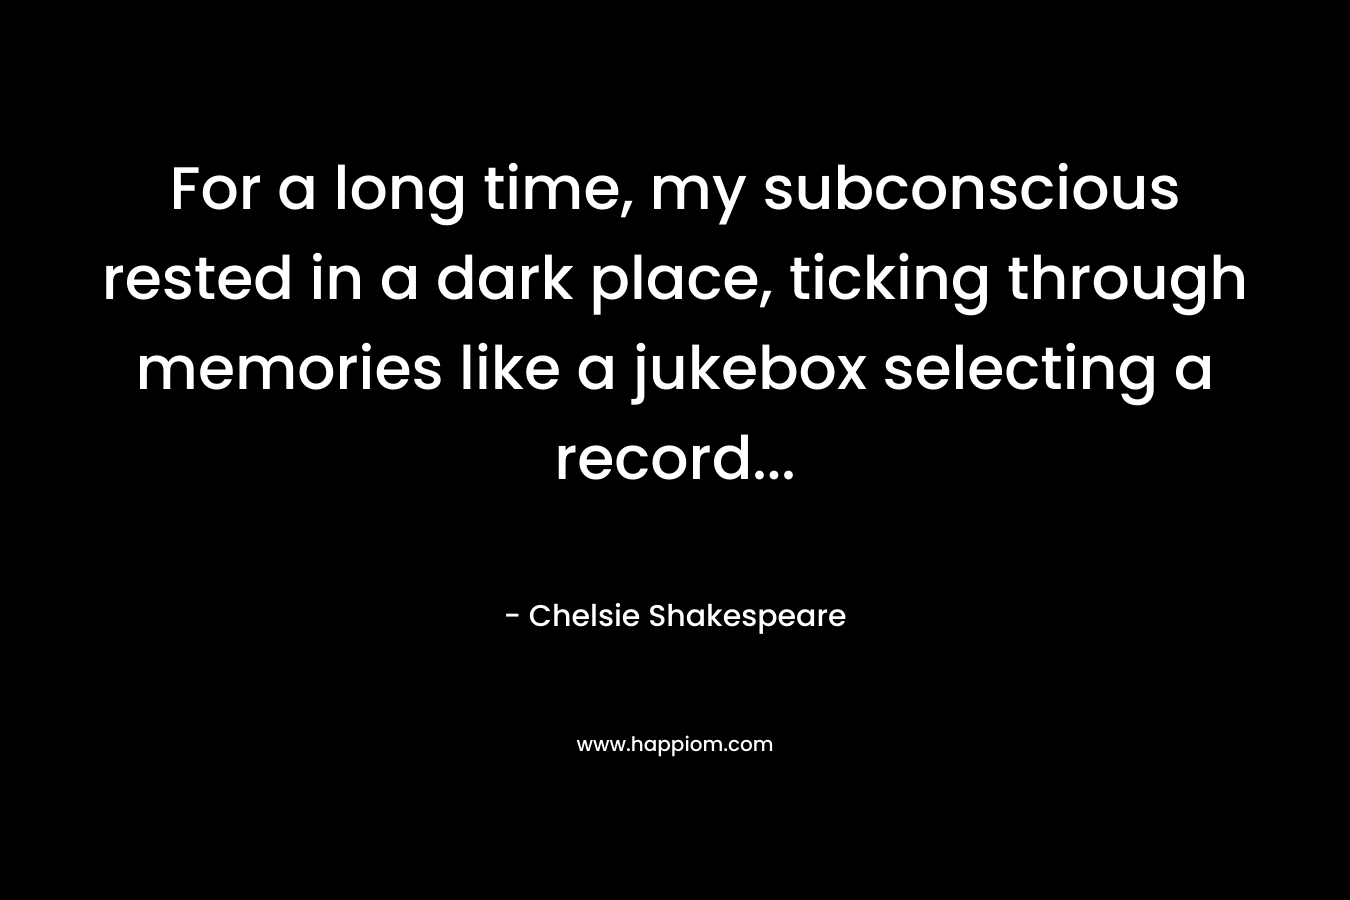 For a long time, my subconscious rested in a dark place, ticking through memories like a jukebox selecting a record… – Chelsie Shakespeare